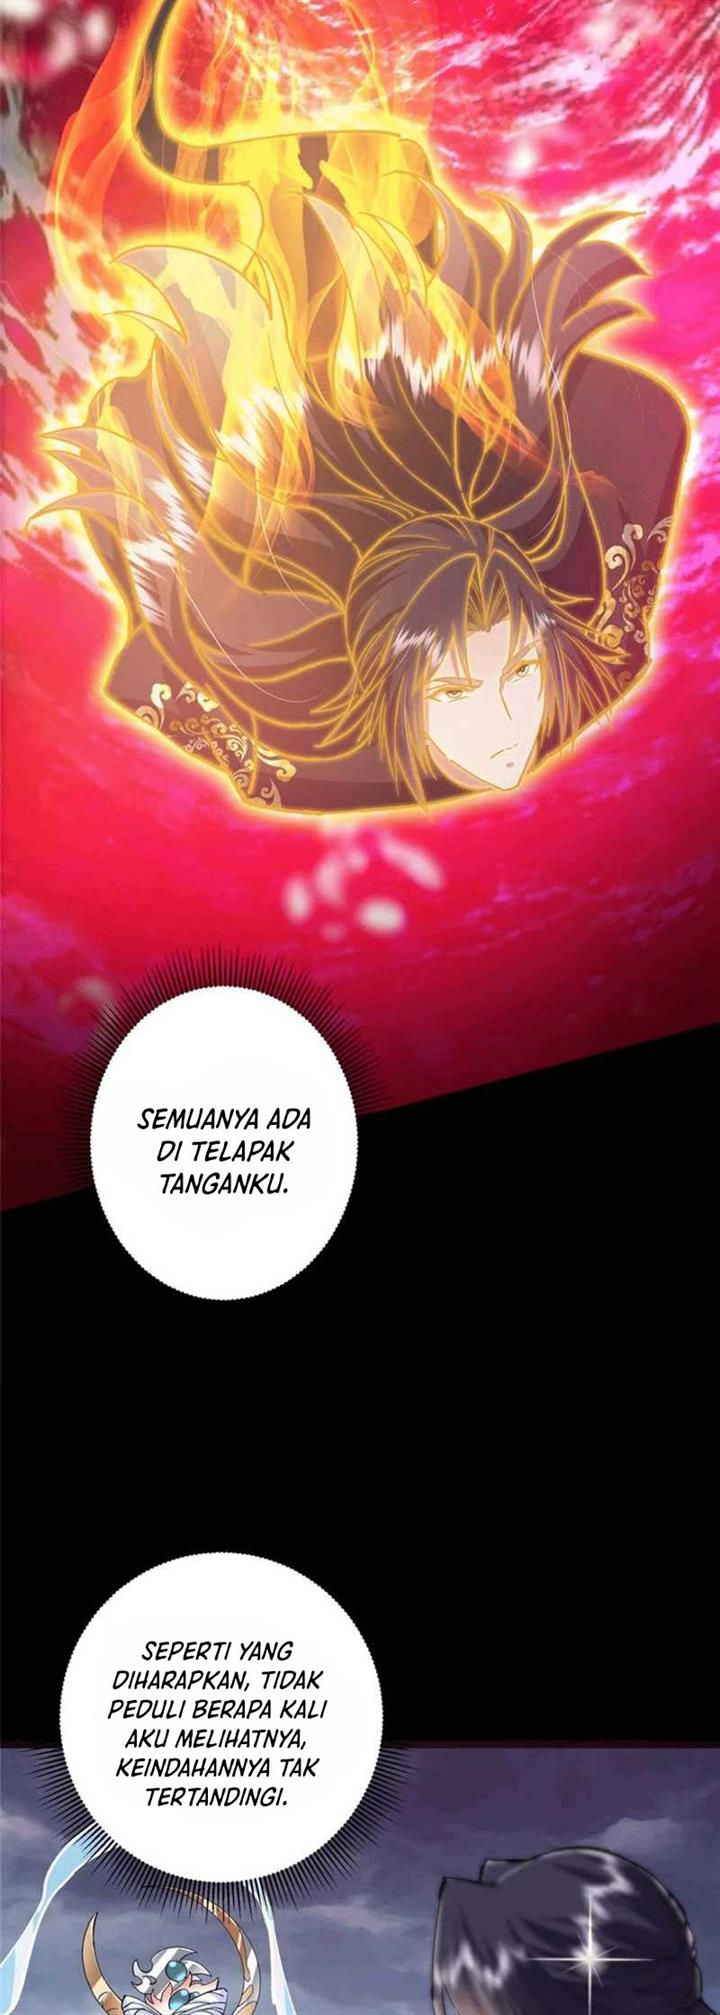 KomiknKeep A Low Profile, Sect Leader Chapter 276